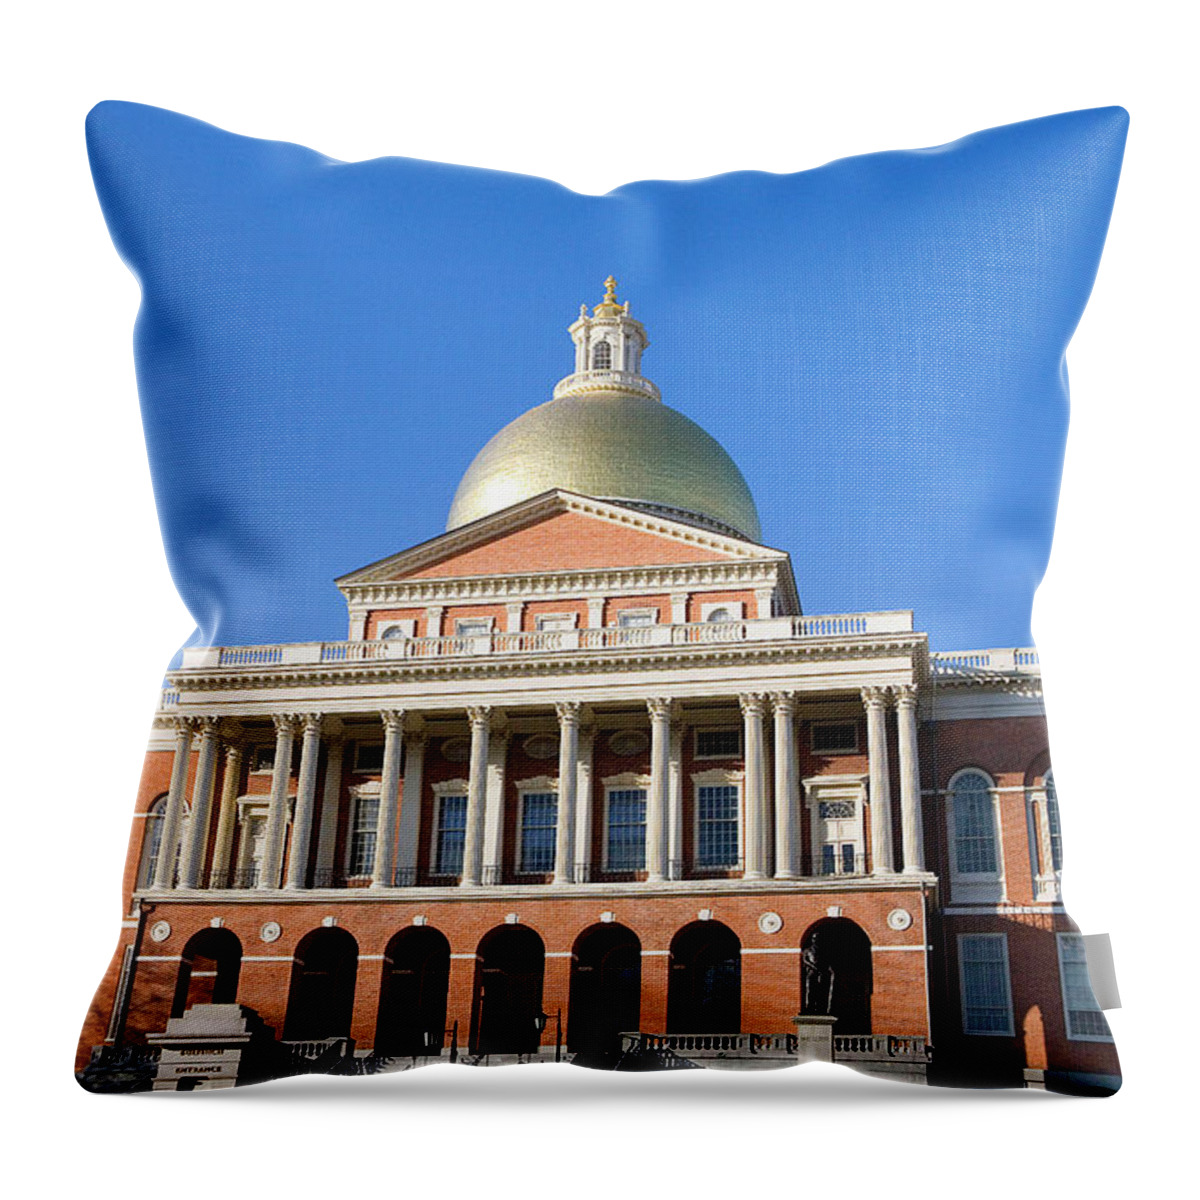 Estock Throw Pillow featuring the digital art Usa, Ma, Boston Common, State Capitol by Claudia Uripos